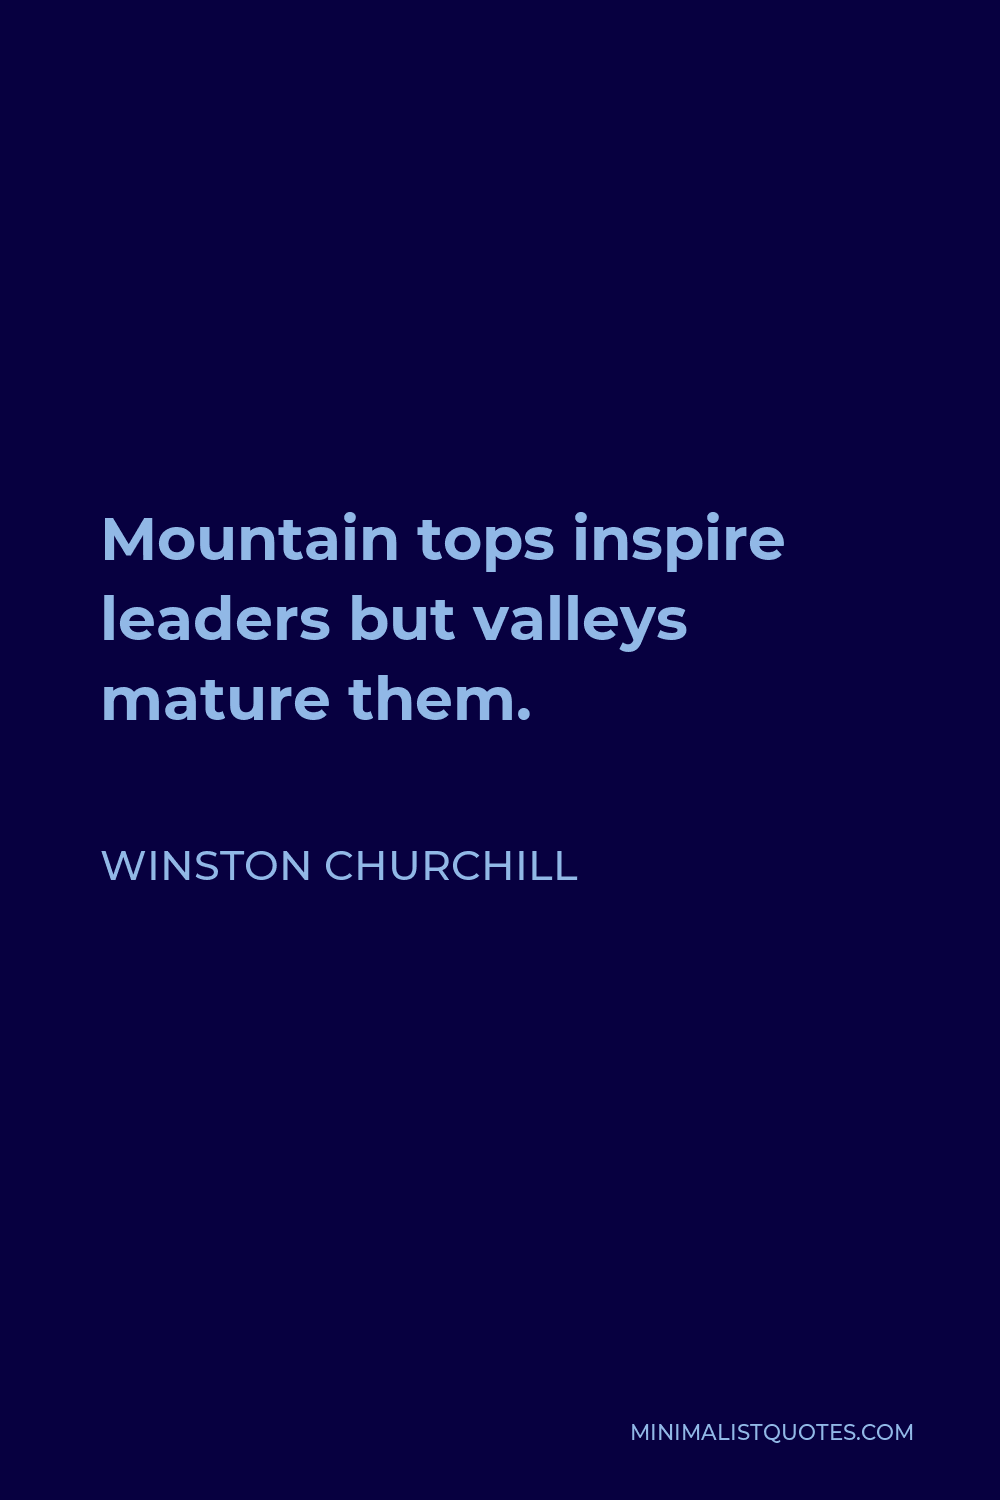 Winston Churchill Quote - Mountain tops inspire leaders but valleys mature them.